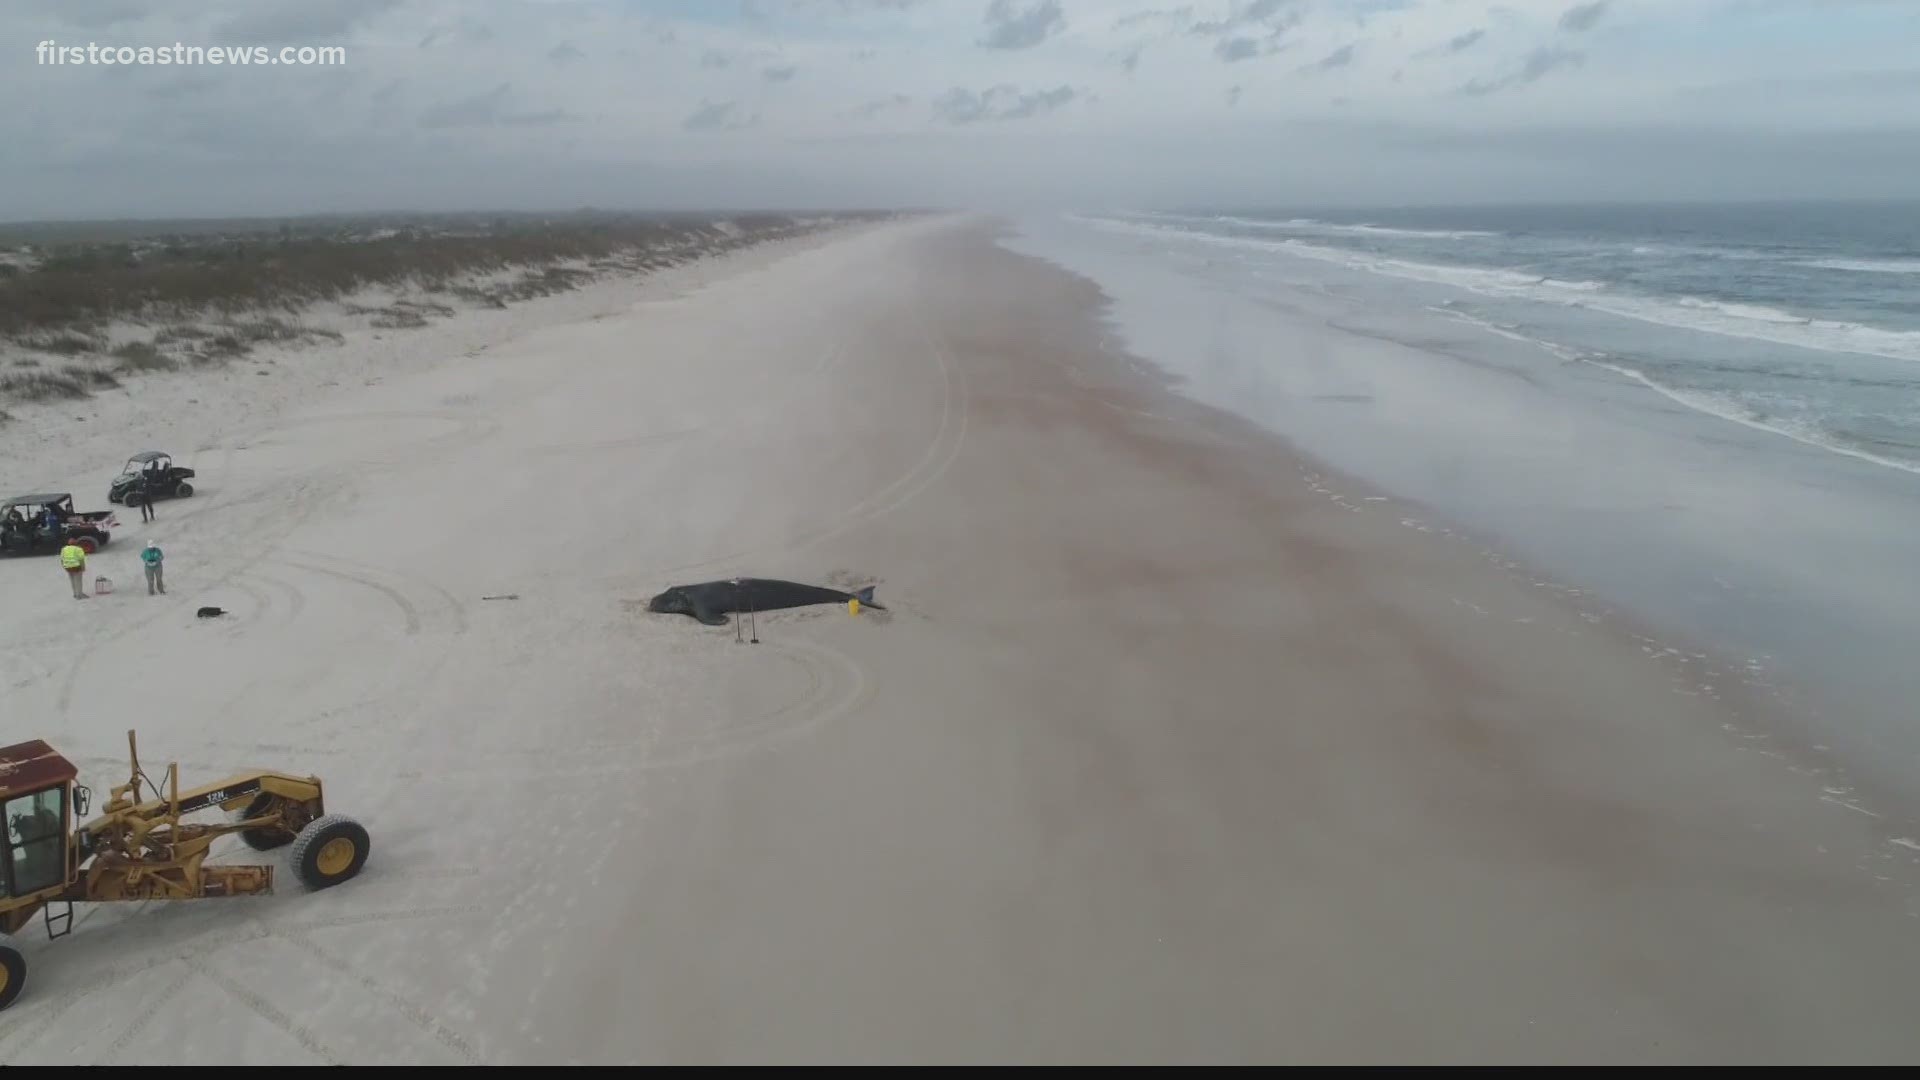 Investigators found there were no state violations and no navigational rules were broken when a boat hit a right whale calf in the St. Augustine inlet last month.